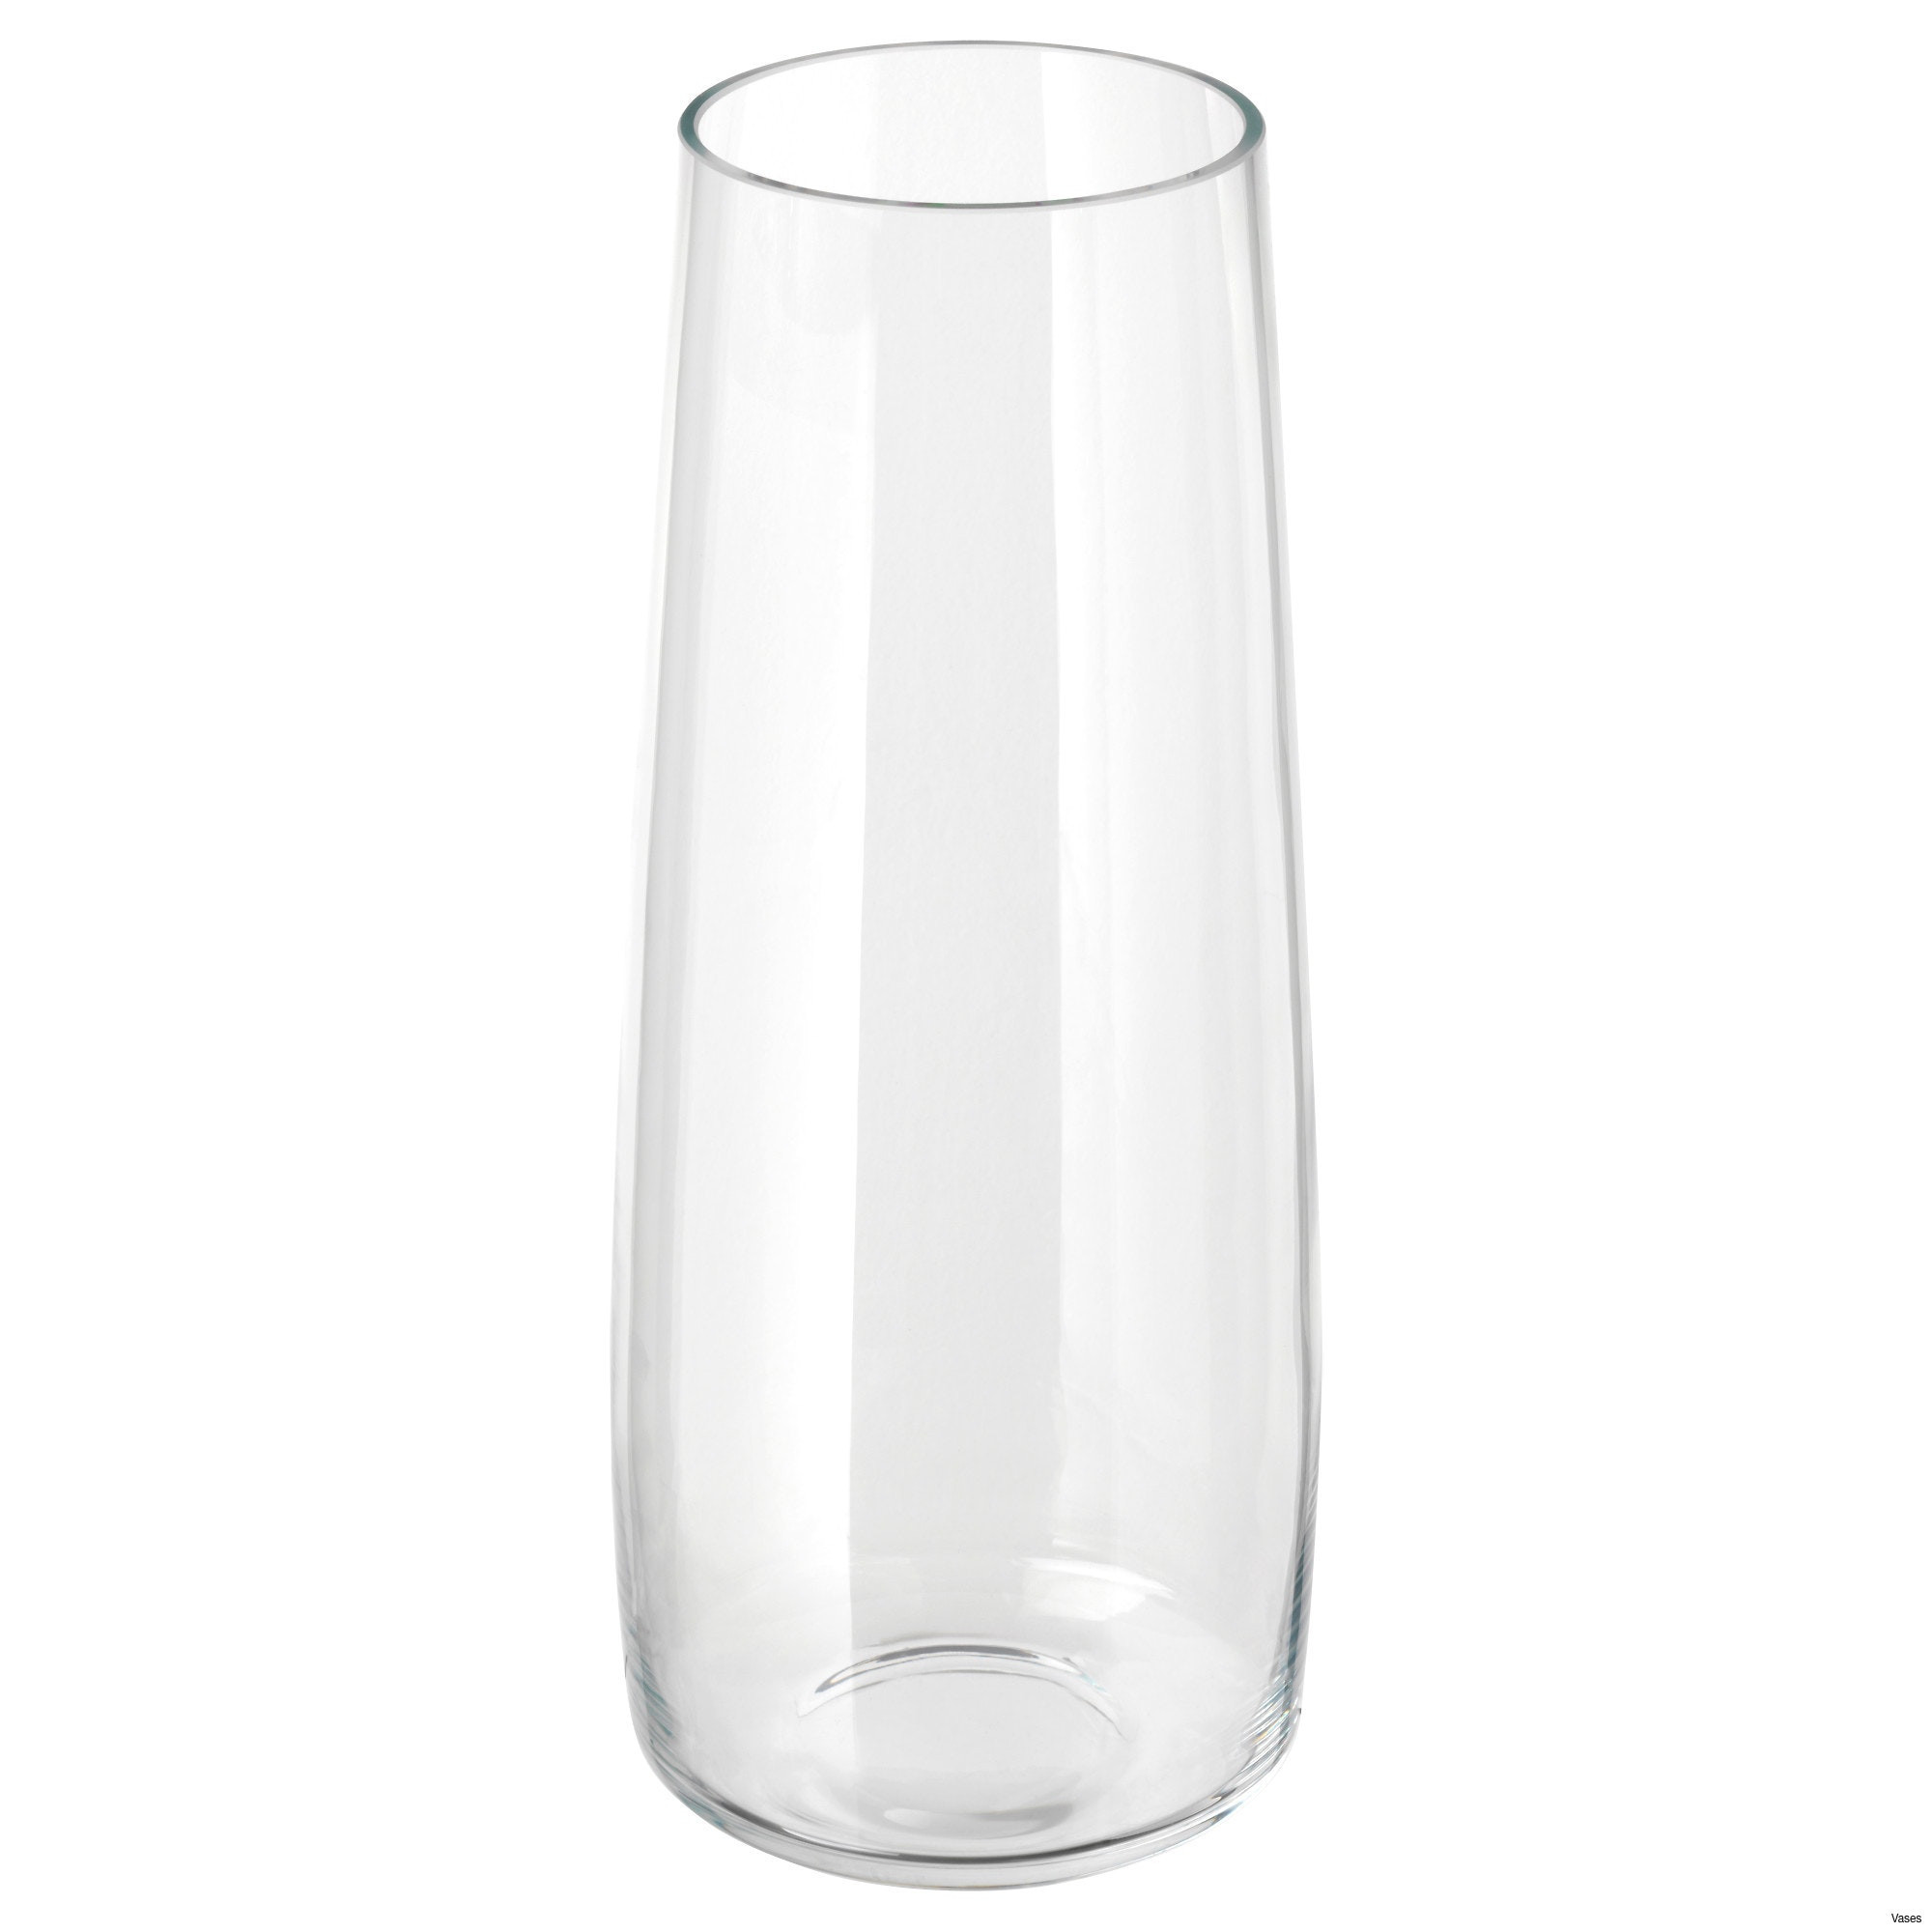 26 Popular Flat Round Glass Vase 2024 free download flat round glass vase of round glass vases photograph clear glass planters fresh clear glass regarding round glass vases photograph clear glass planters fresh clear glass vases of round glas